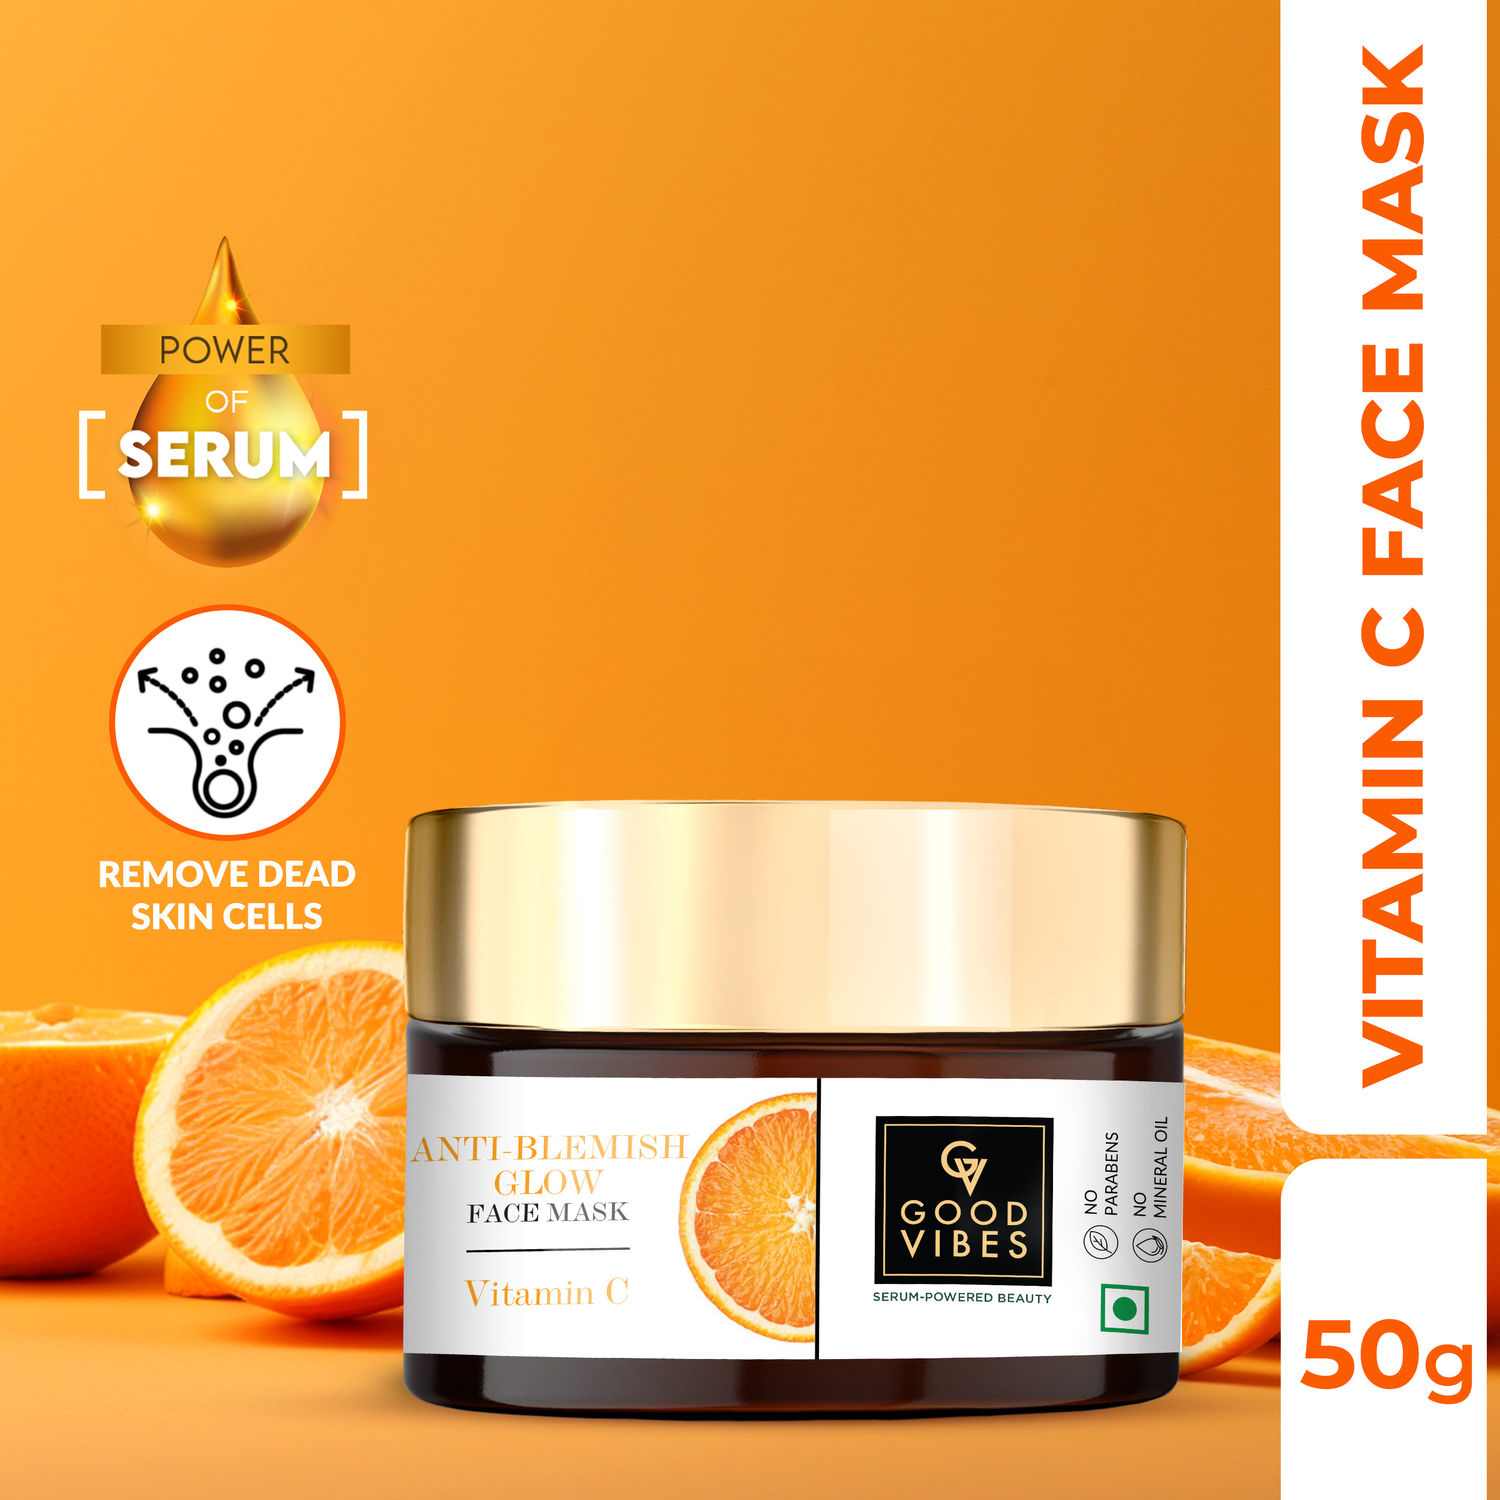 Buy Good Vibes Anti Blemish Glow Face Mask Vitamin C with Power of Serum | No Parabens, No Animal Testing, Vegan, No Mineral Oil, No Sulphates (50 g) - Purplle